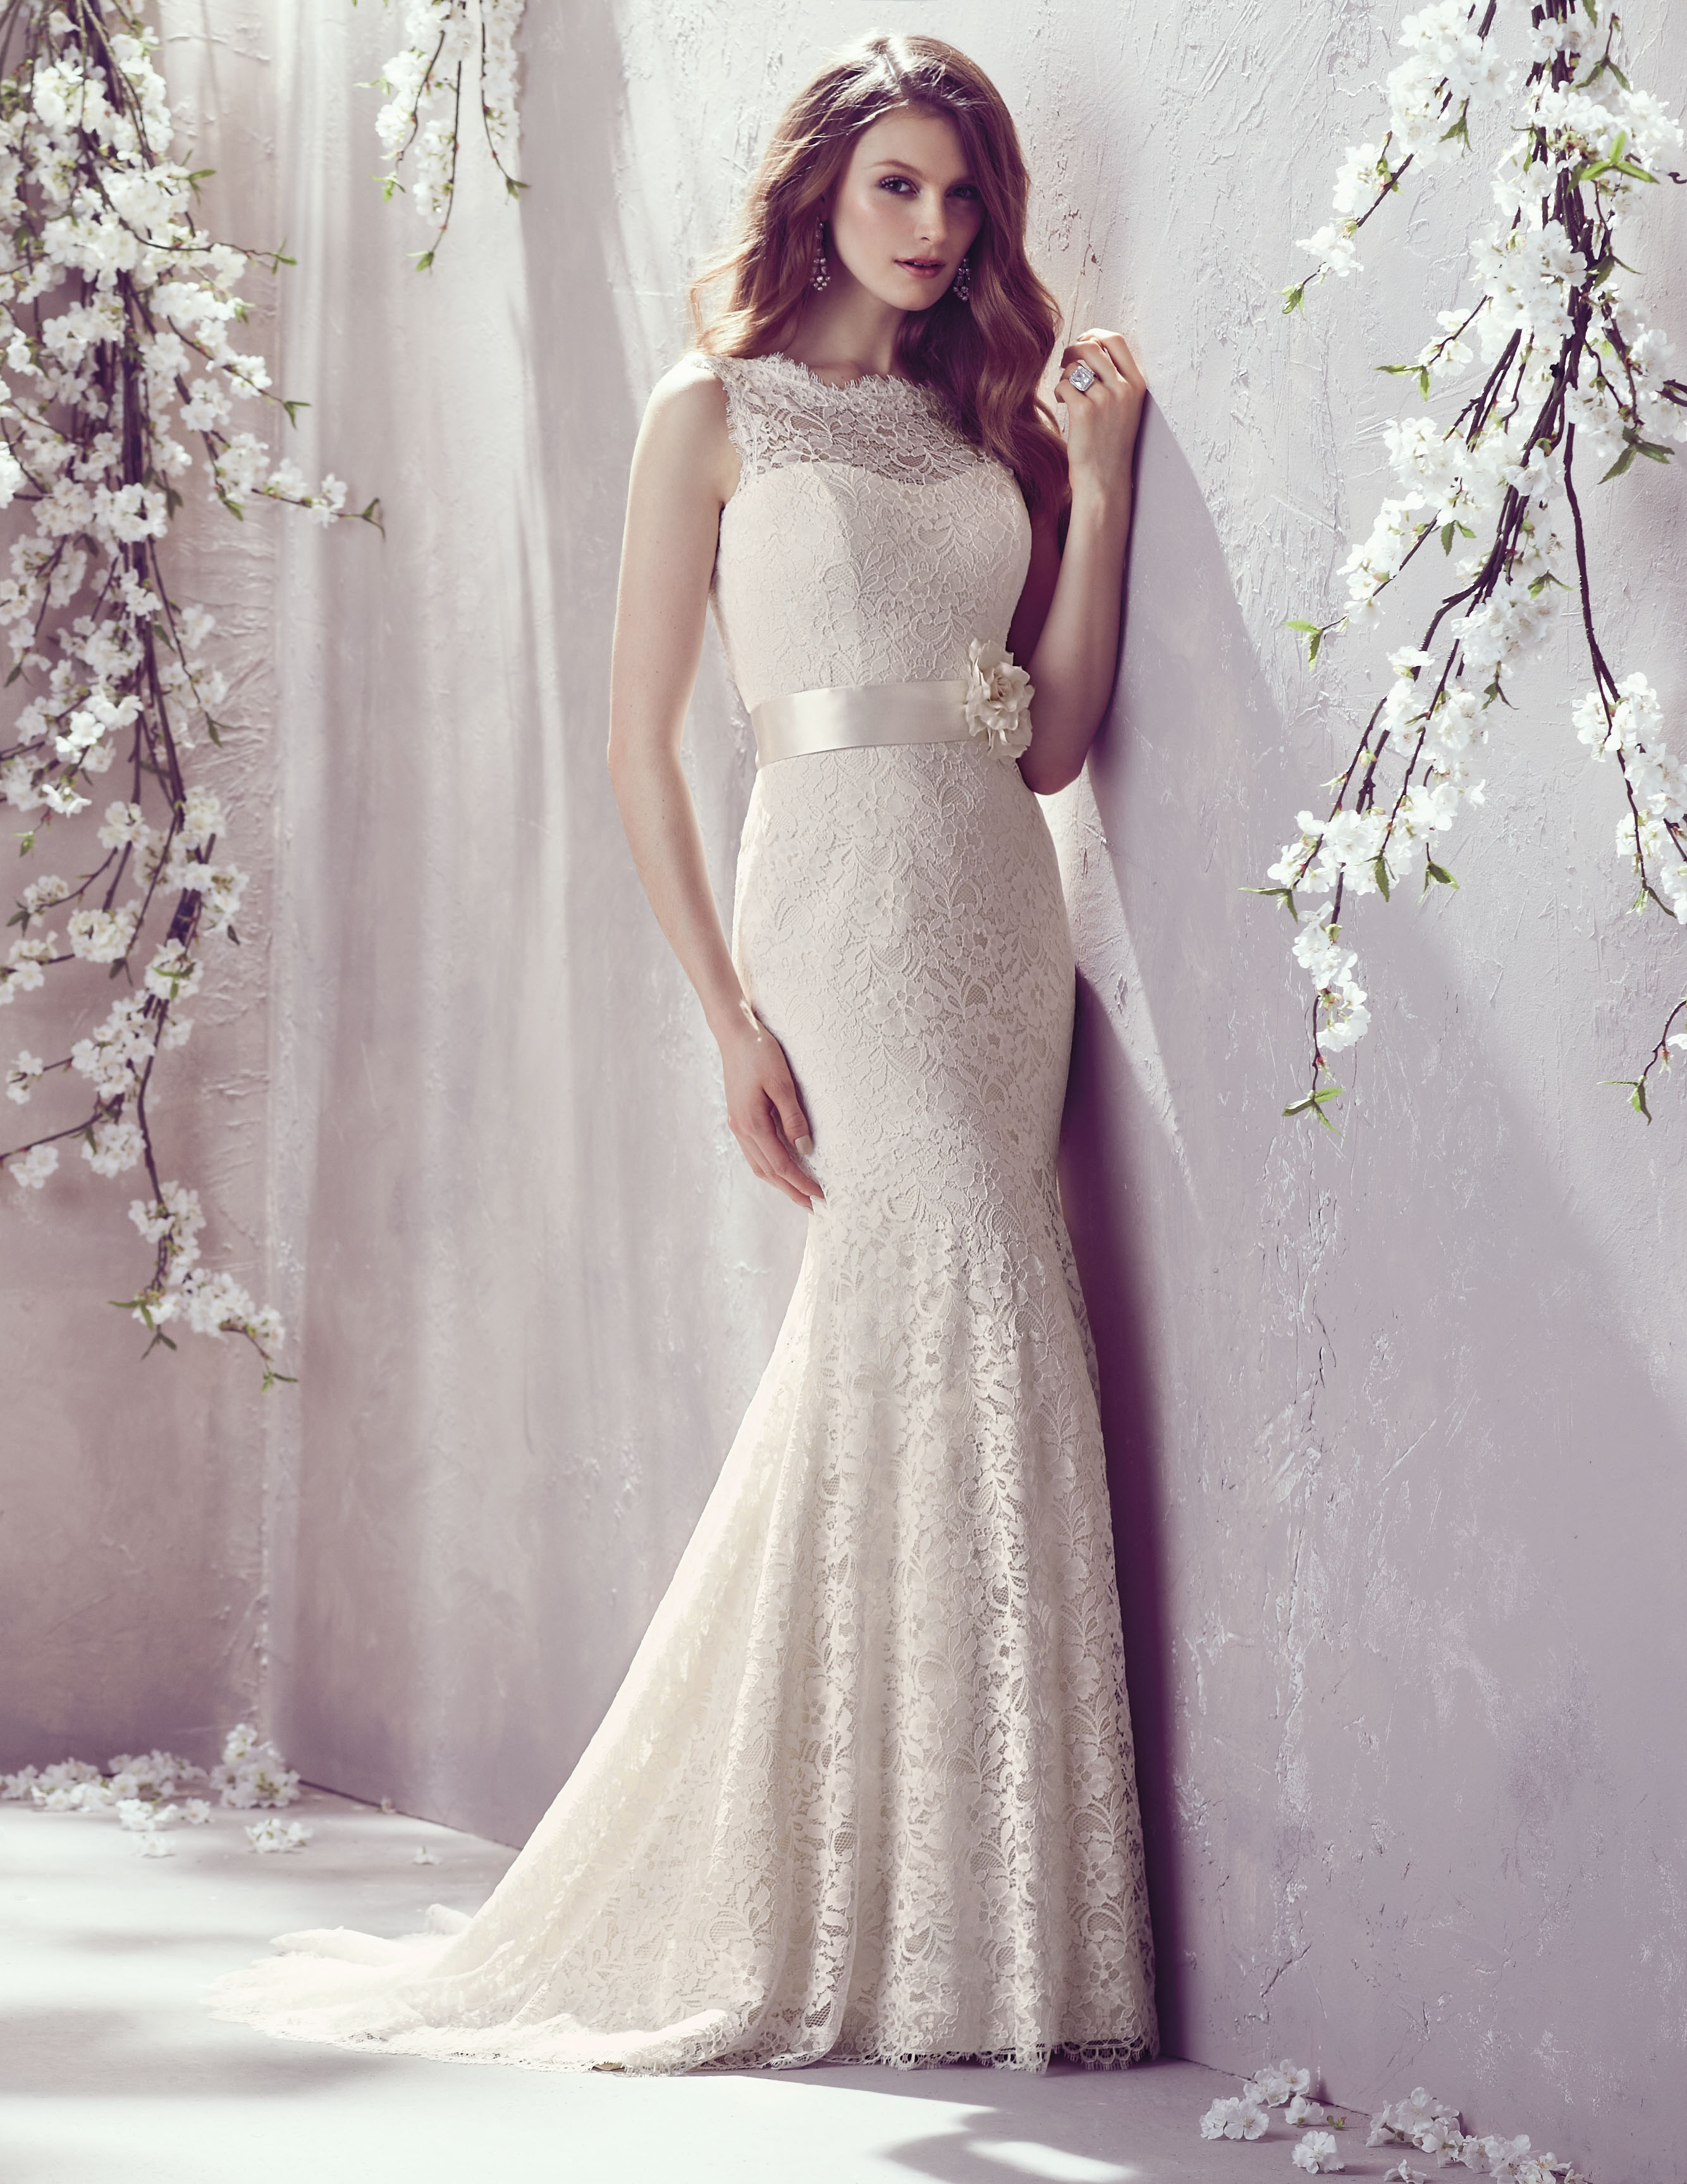 Perfect Wedding Dress for the Rectangle Shaped Bride